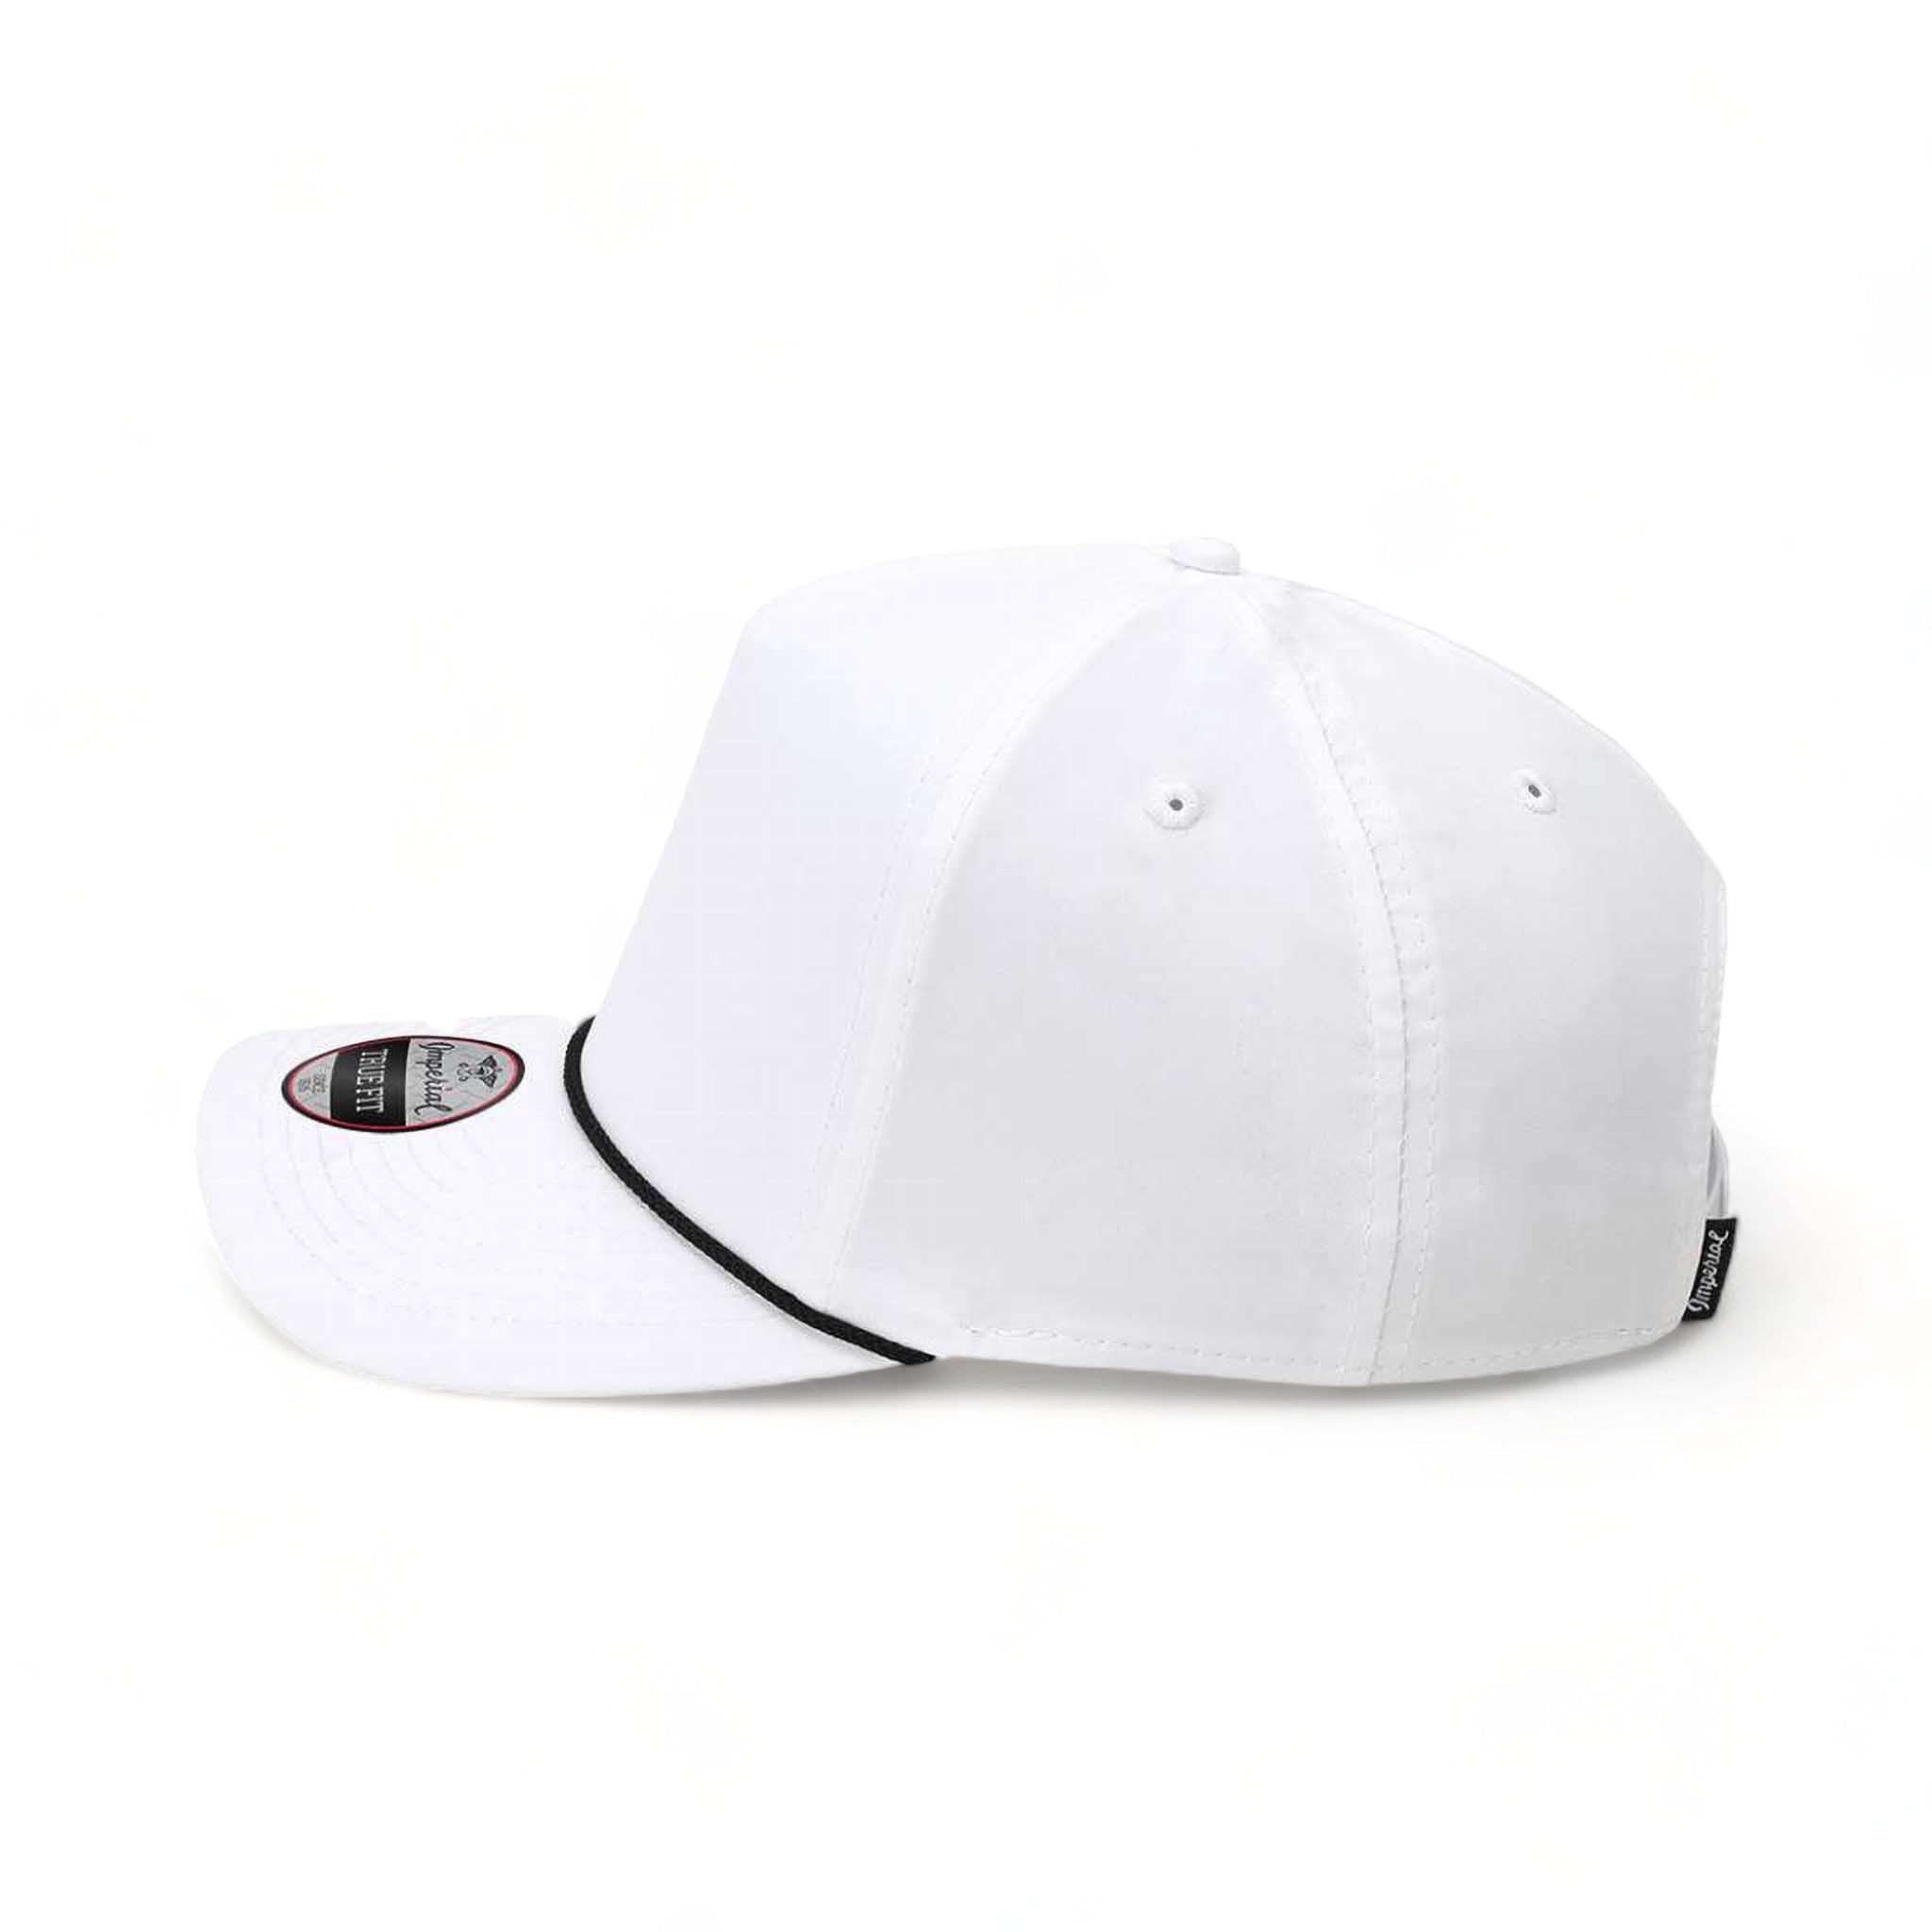 Side view of Imperial 5054 custom hat in white and black